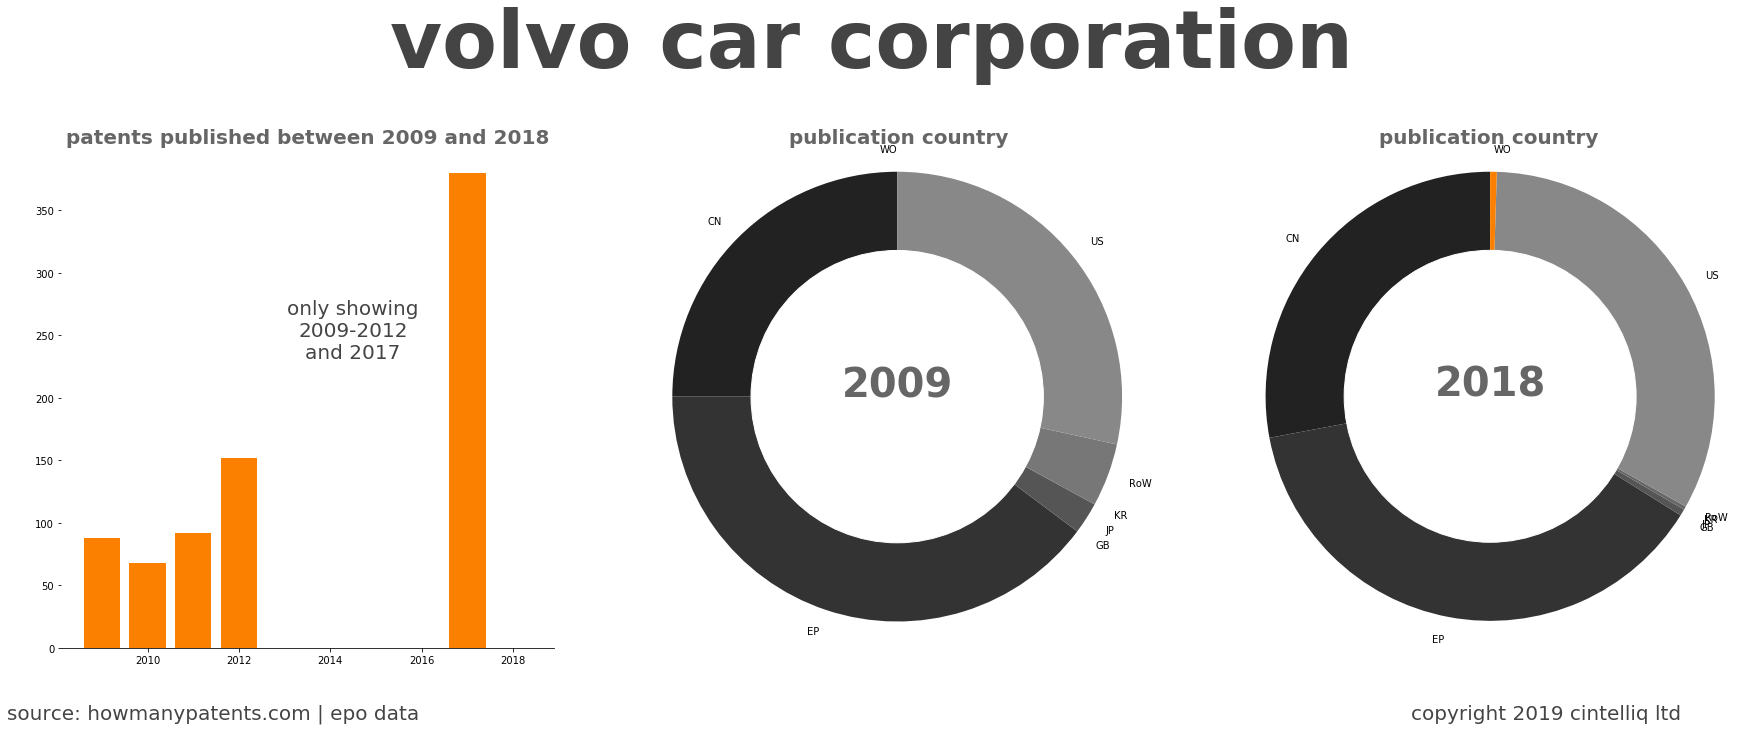 summary of patents for Volvo Car Corporation